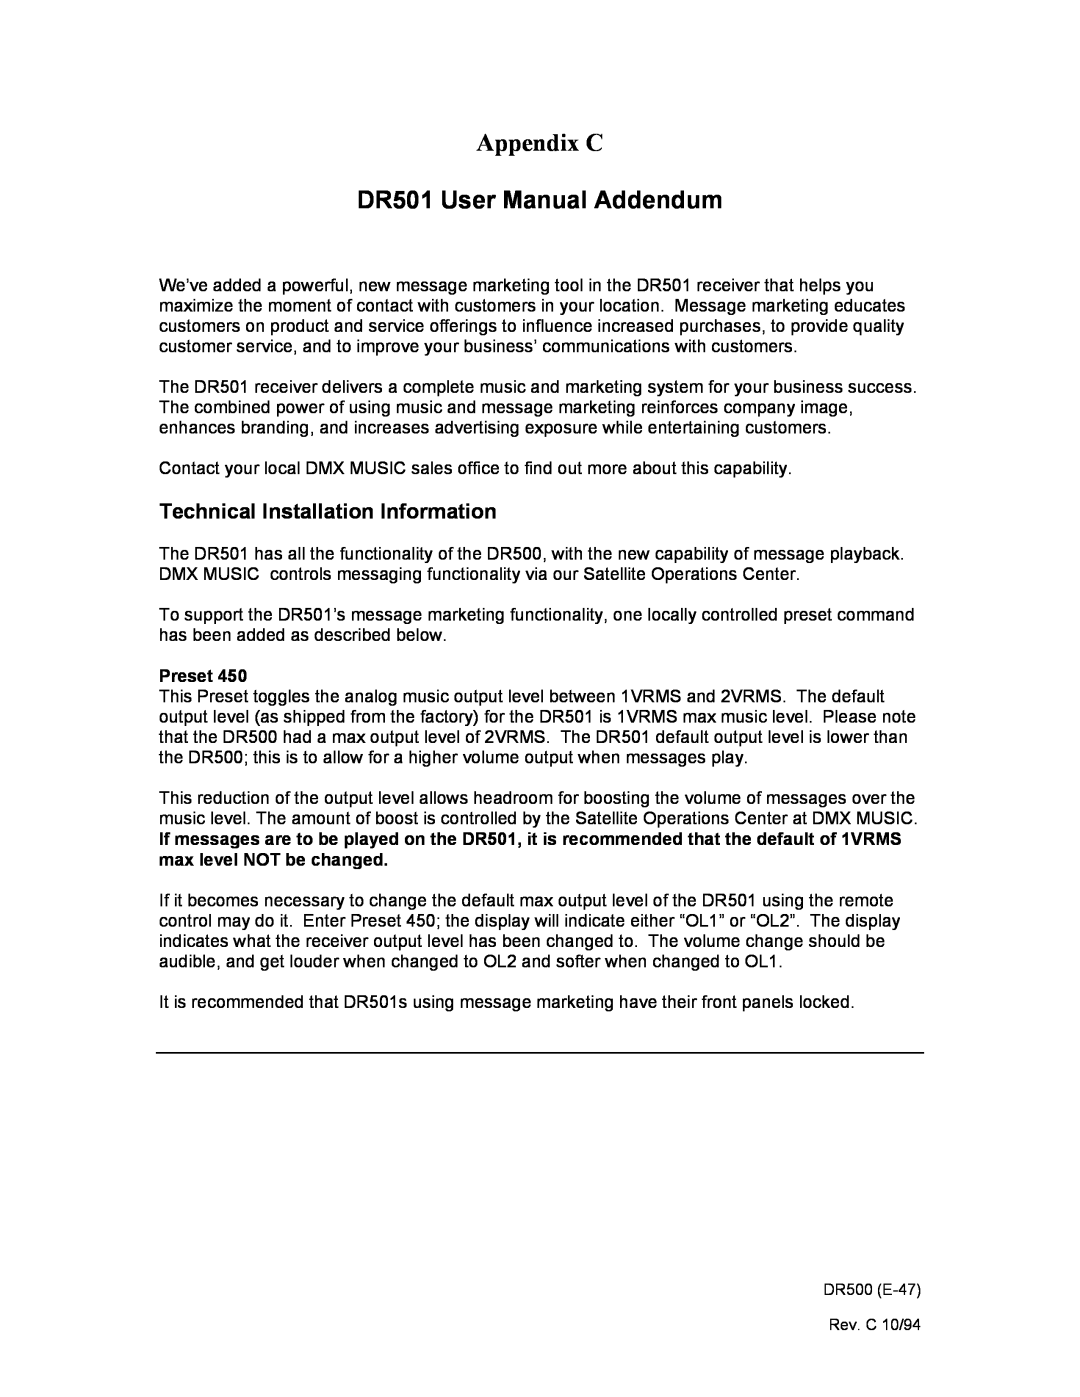 Philips DR500 manual Technical Installation Information 